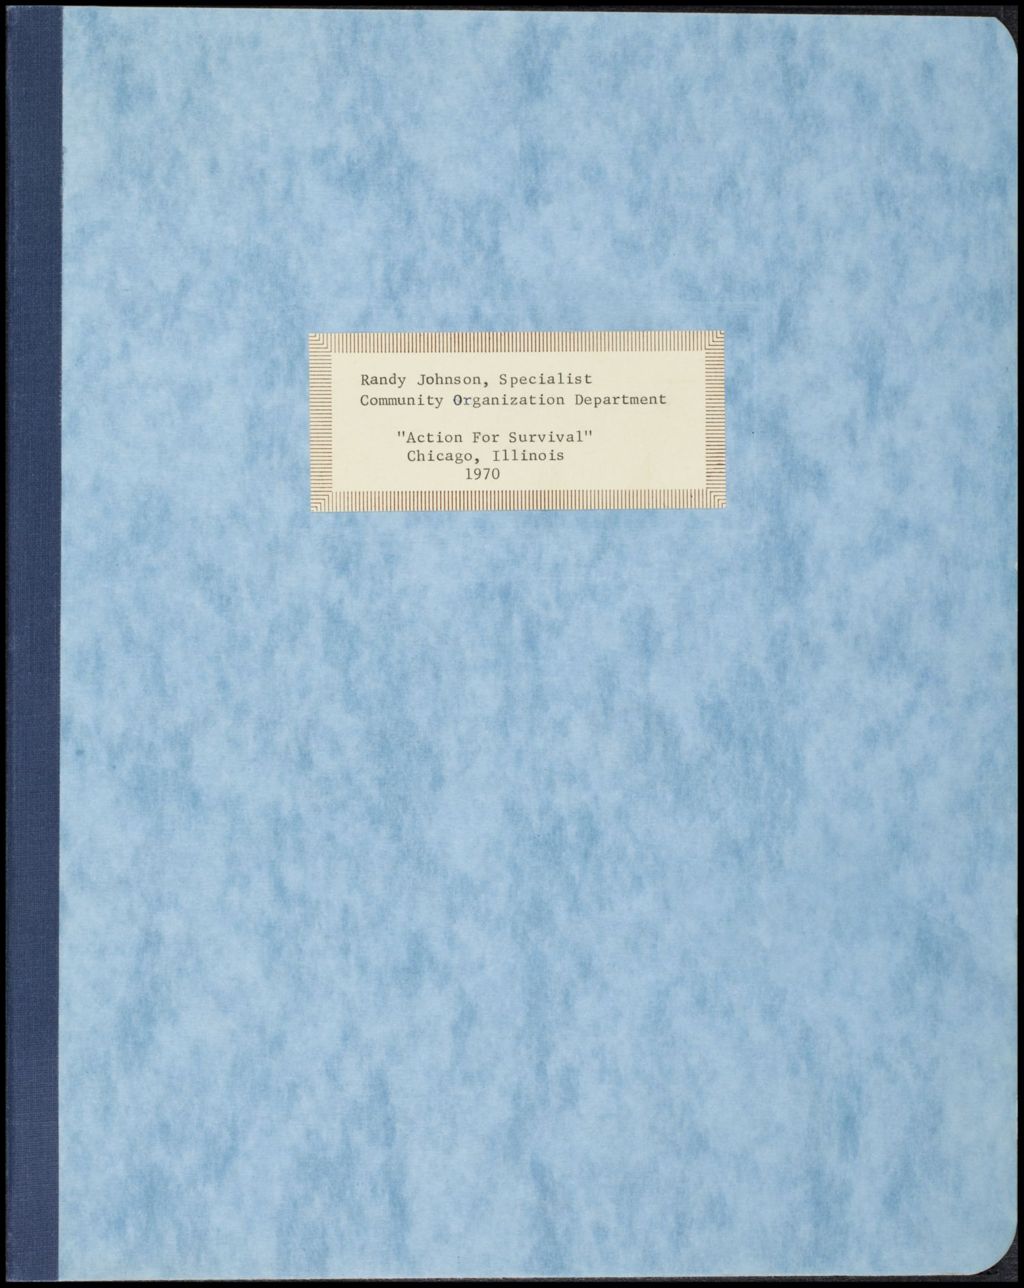 Miniature of Crime in the Community Must Go Position Paper, 1970 (Folder III-1871)